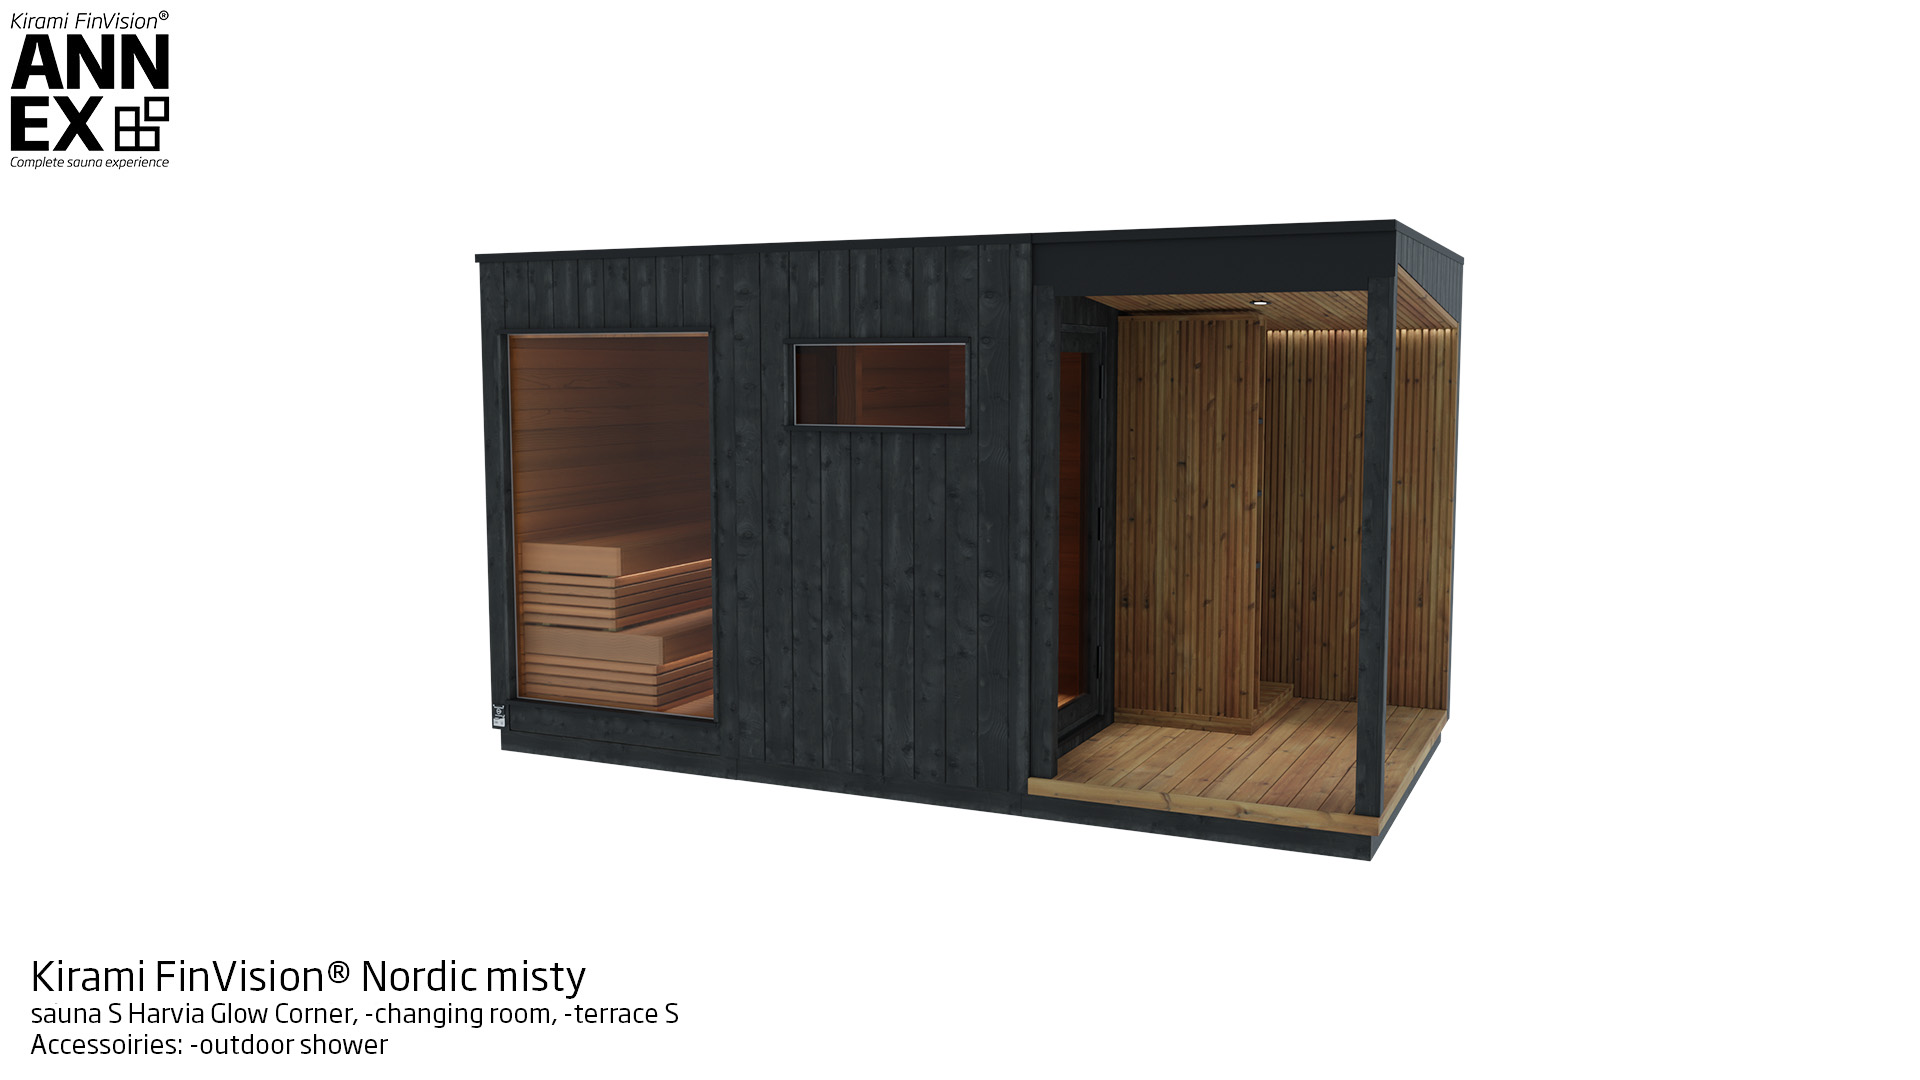 Kirami FinVision® Nordic misty, -sauna S with Harvia Electric heater, -changing room, -terrace S with Outdoor shower module | Kirami FinVision® Annex